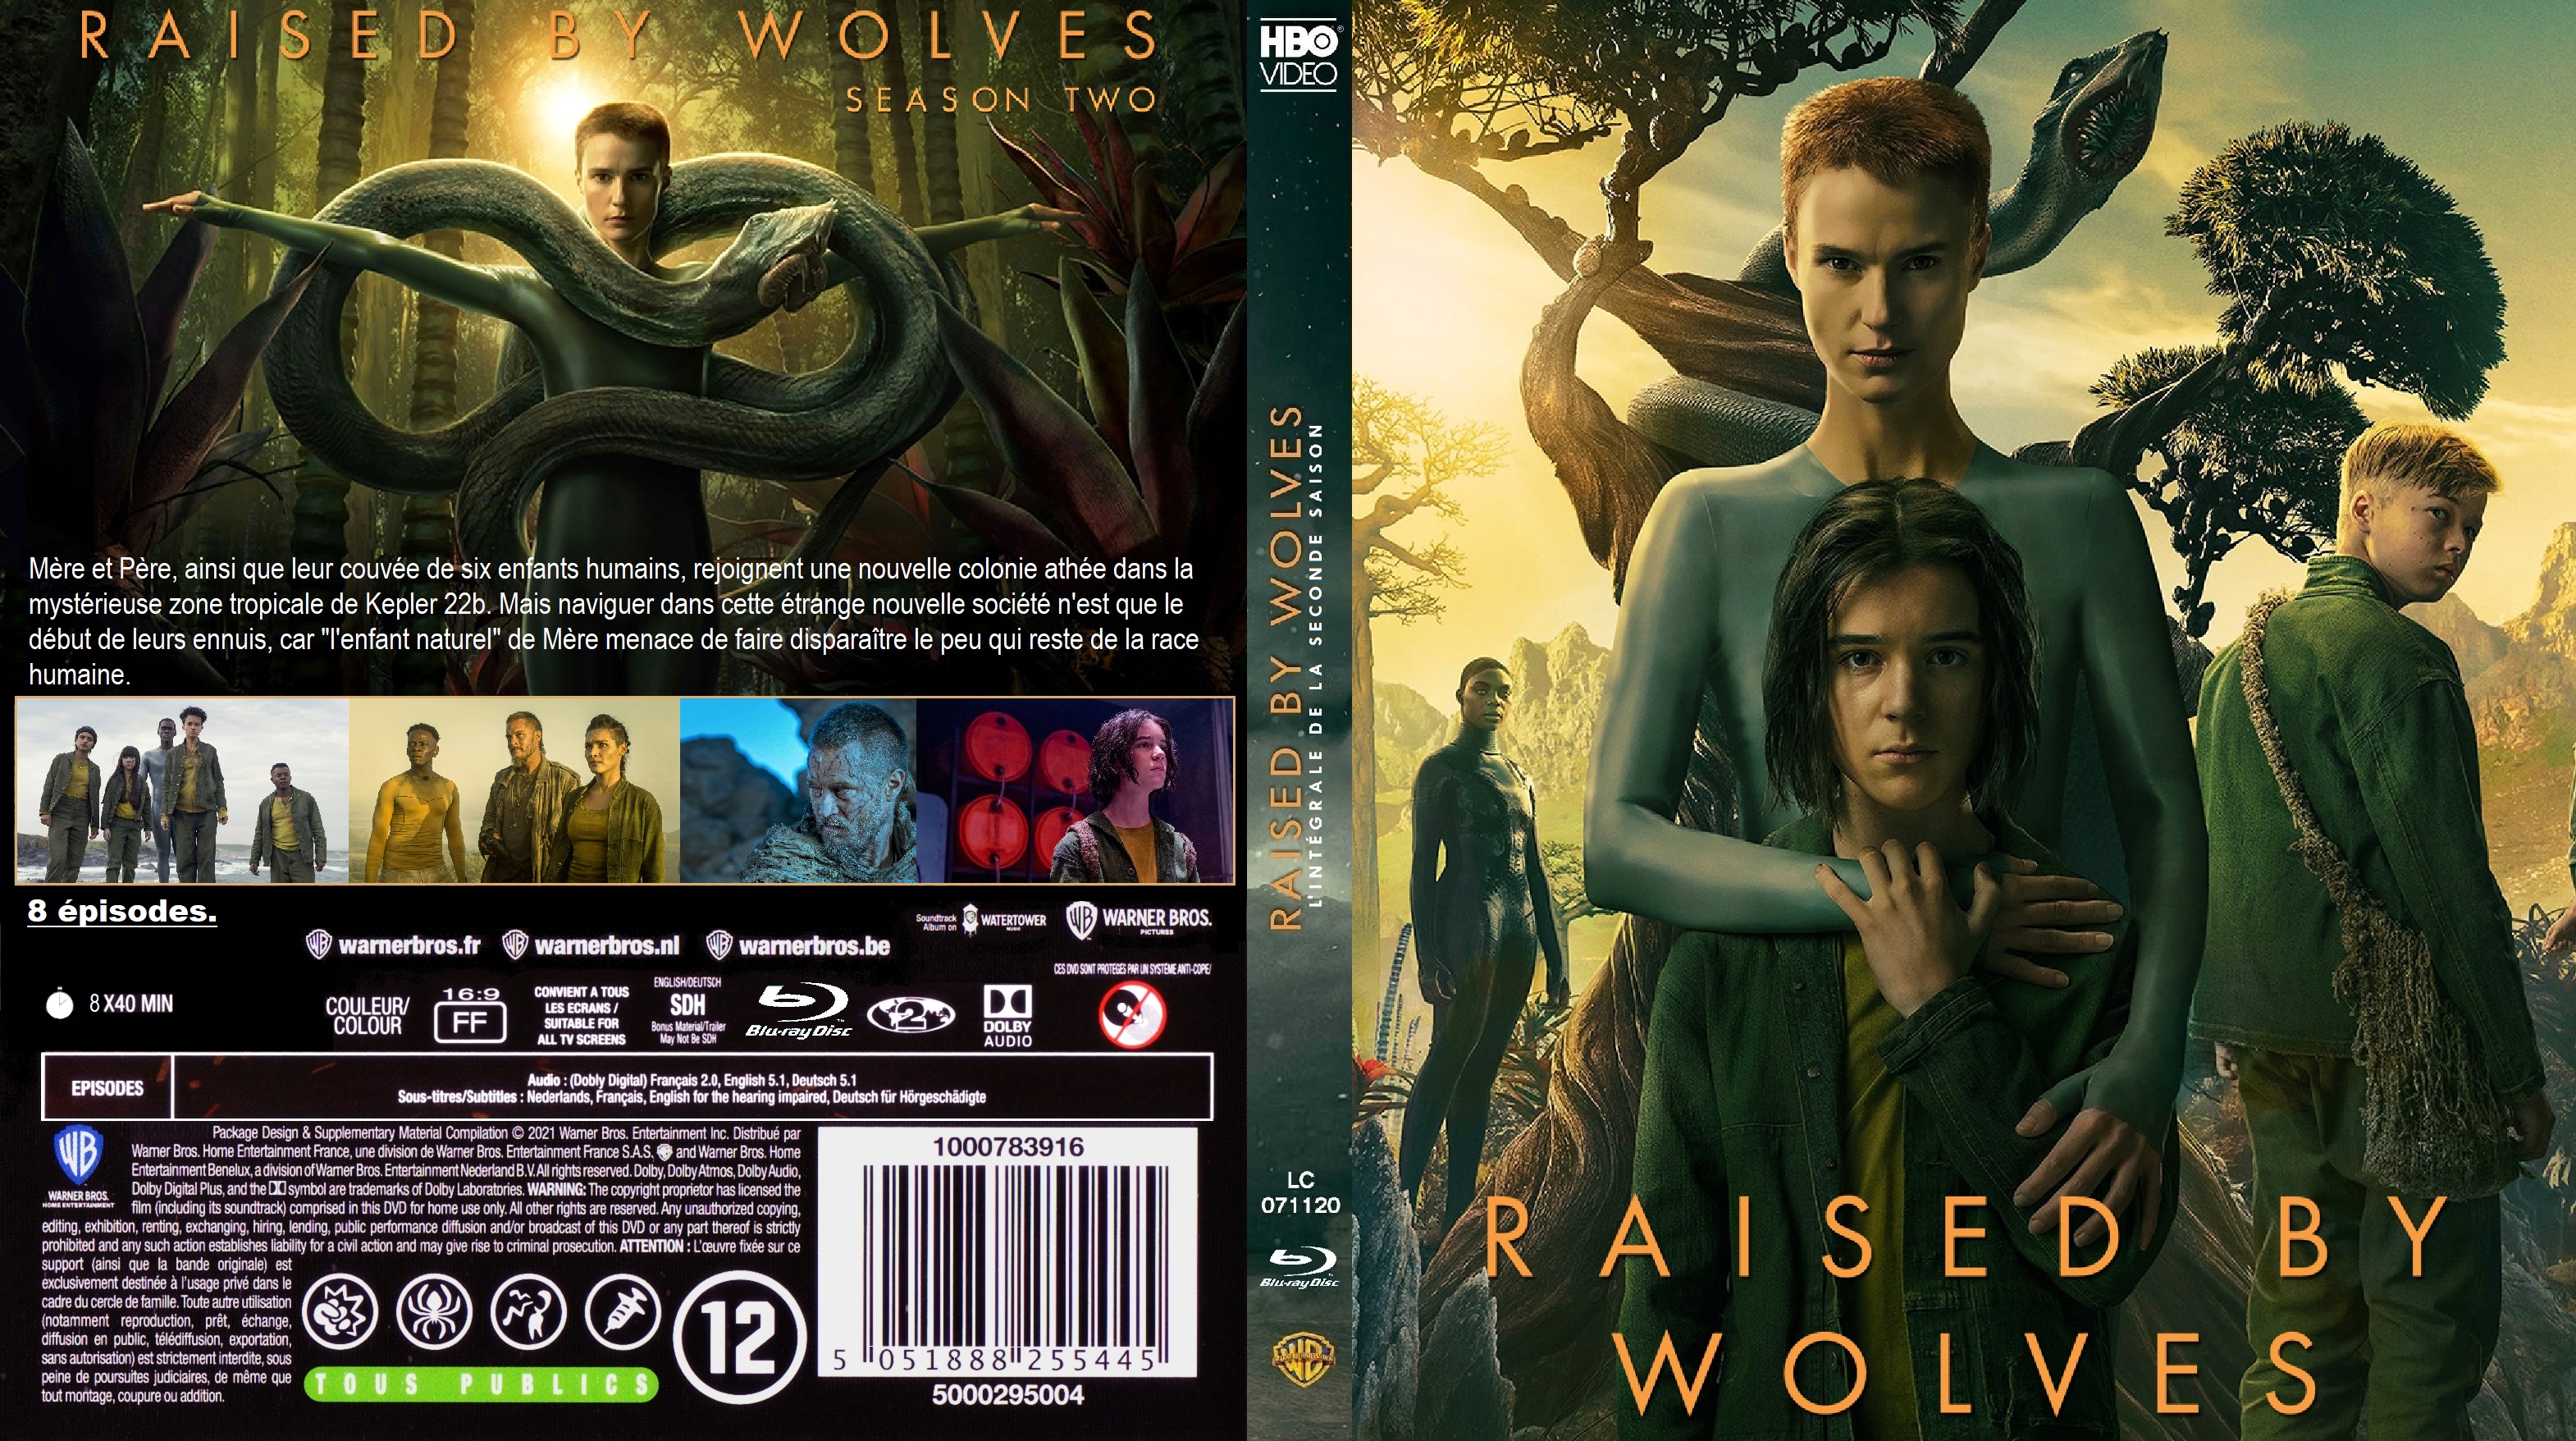 Jaquette DVD Raised by Wolves  saison 2 custom (BLU-RAY)